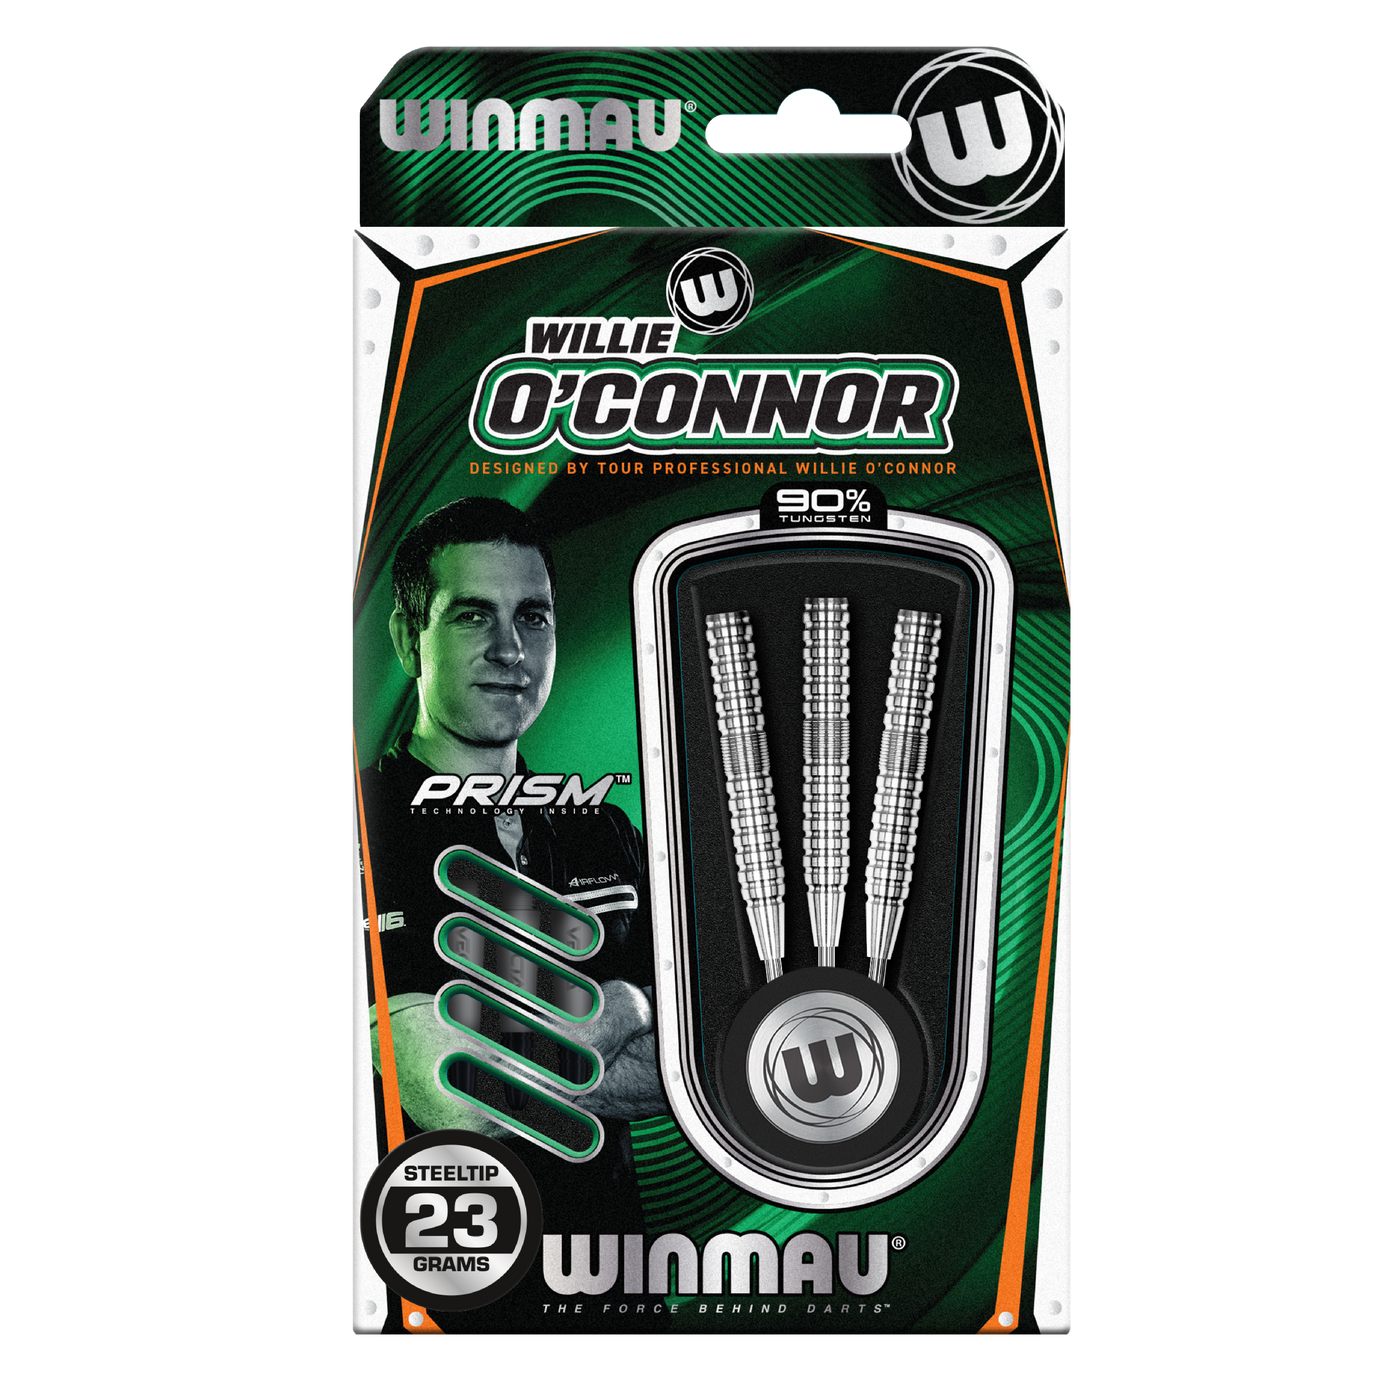 WINMAU WILLIAM WILLIE "THE MAGPIE" O'CONNOR 90% 23g - STEEL TIP